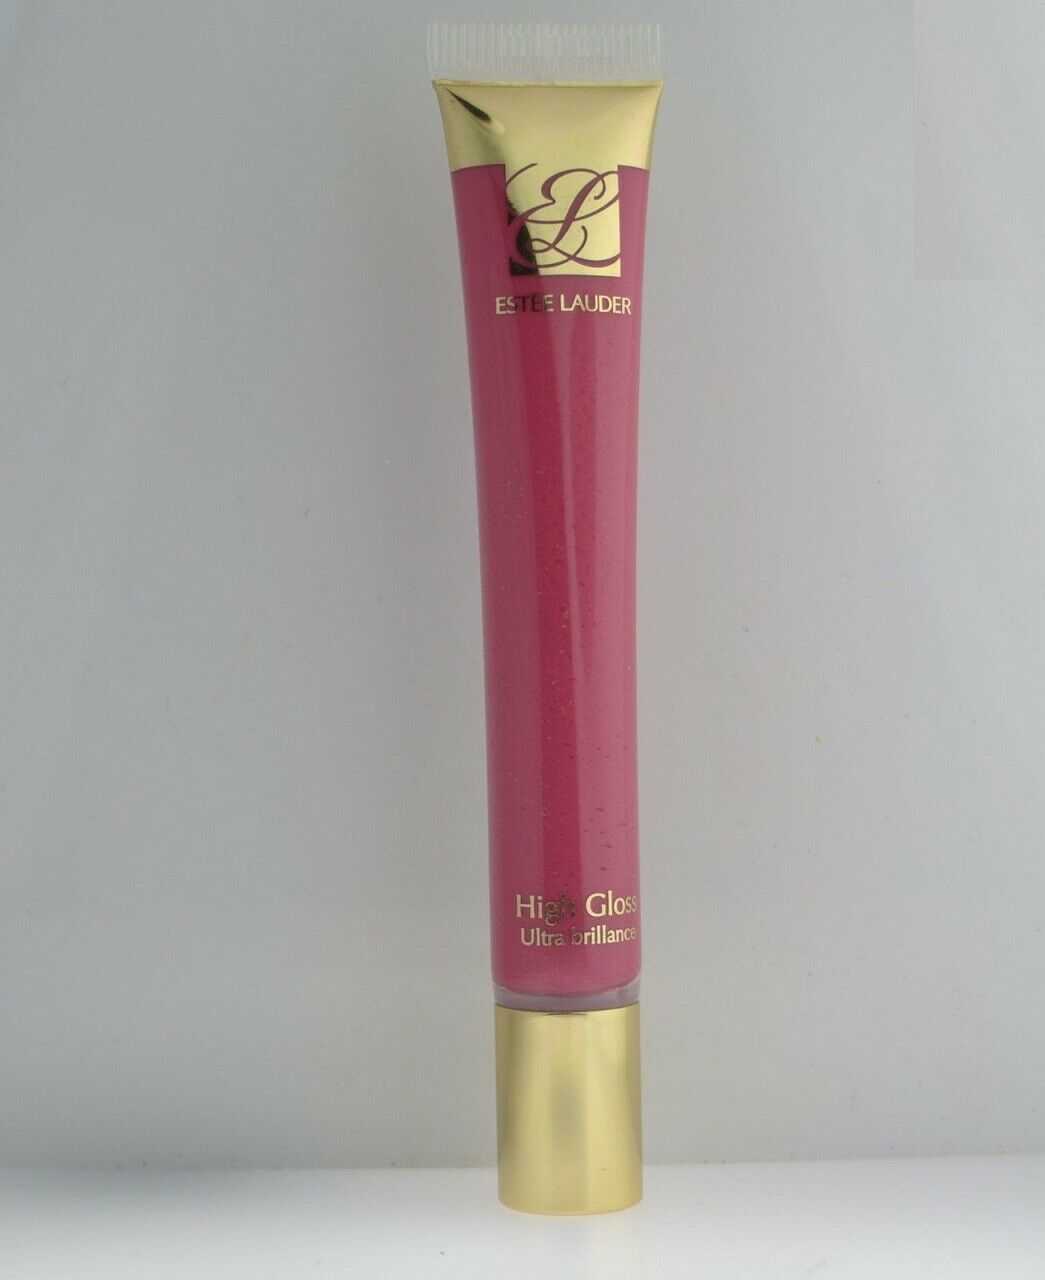 Estee Lauder High Gloss Ultra Brilliance in Pink Ribbon Pink - Full Size